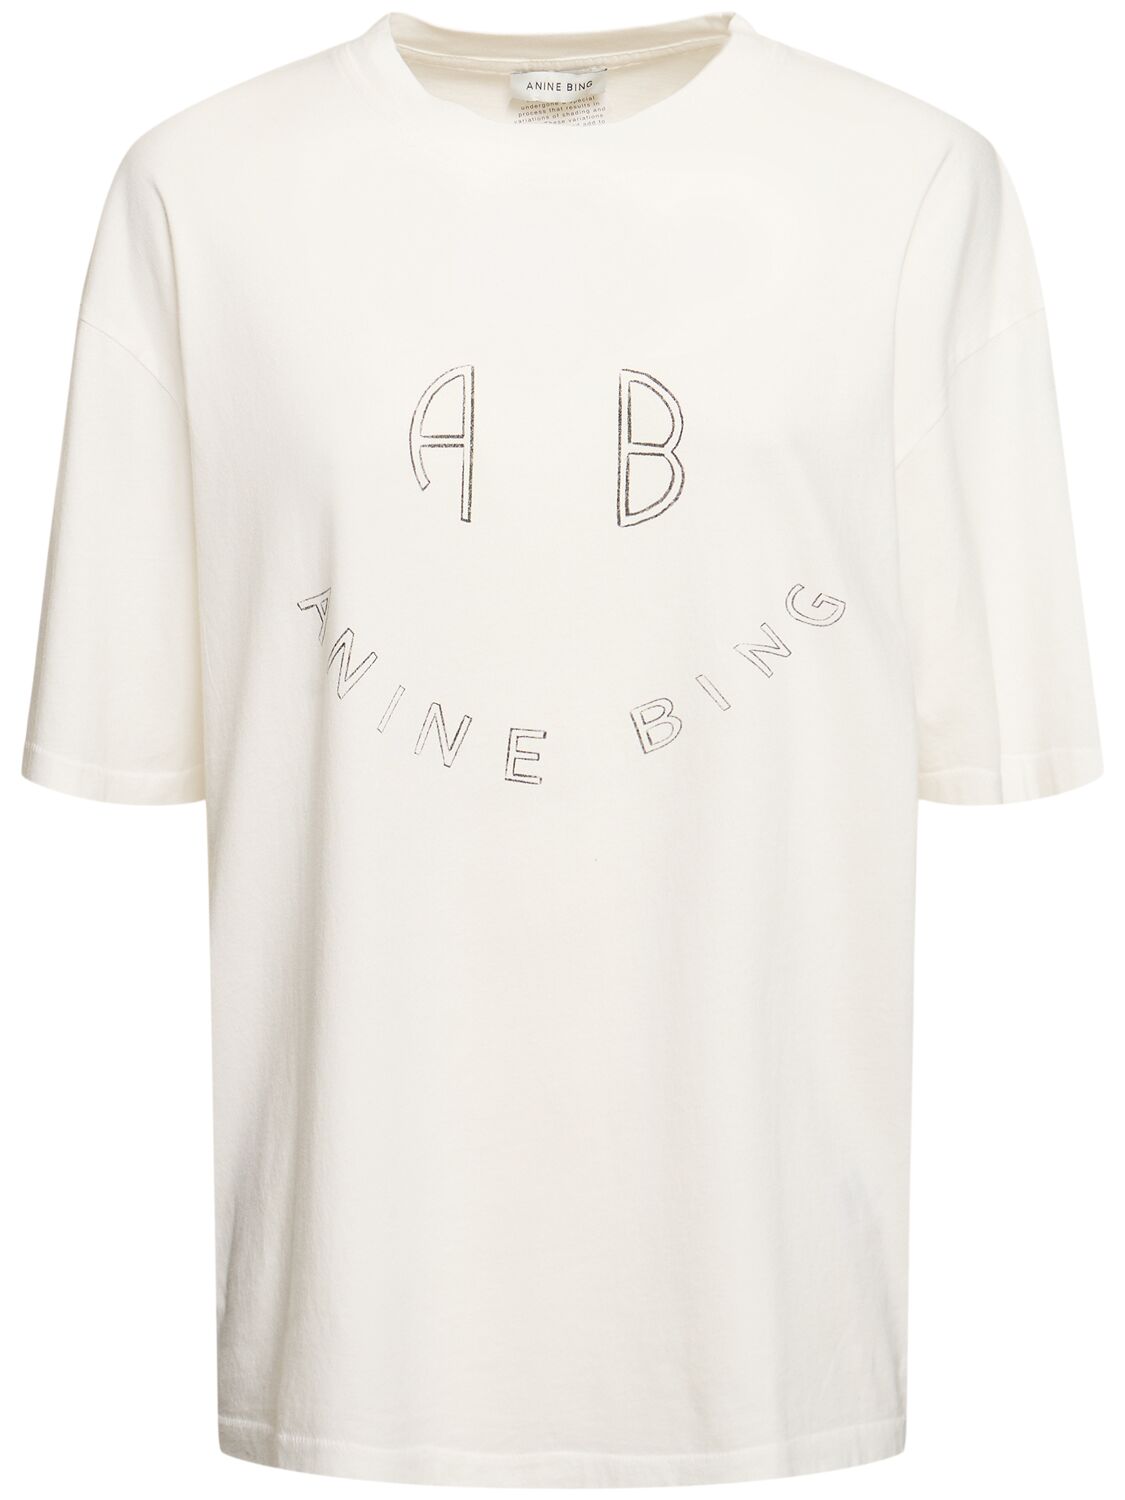 Anine Bing Kent Smiley Cotton Jersey T-shirt In Neutral